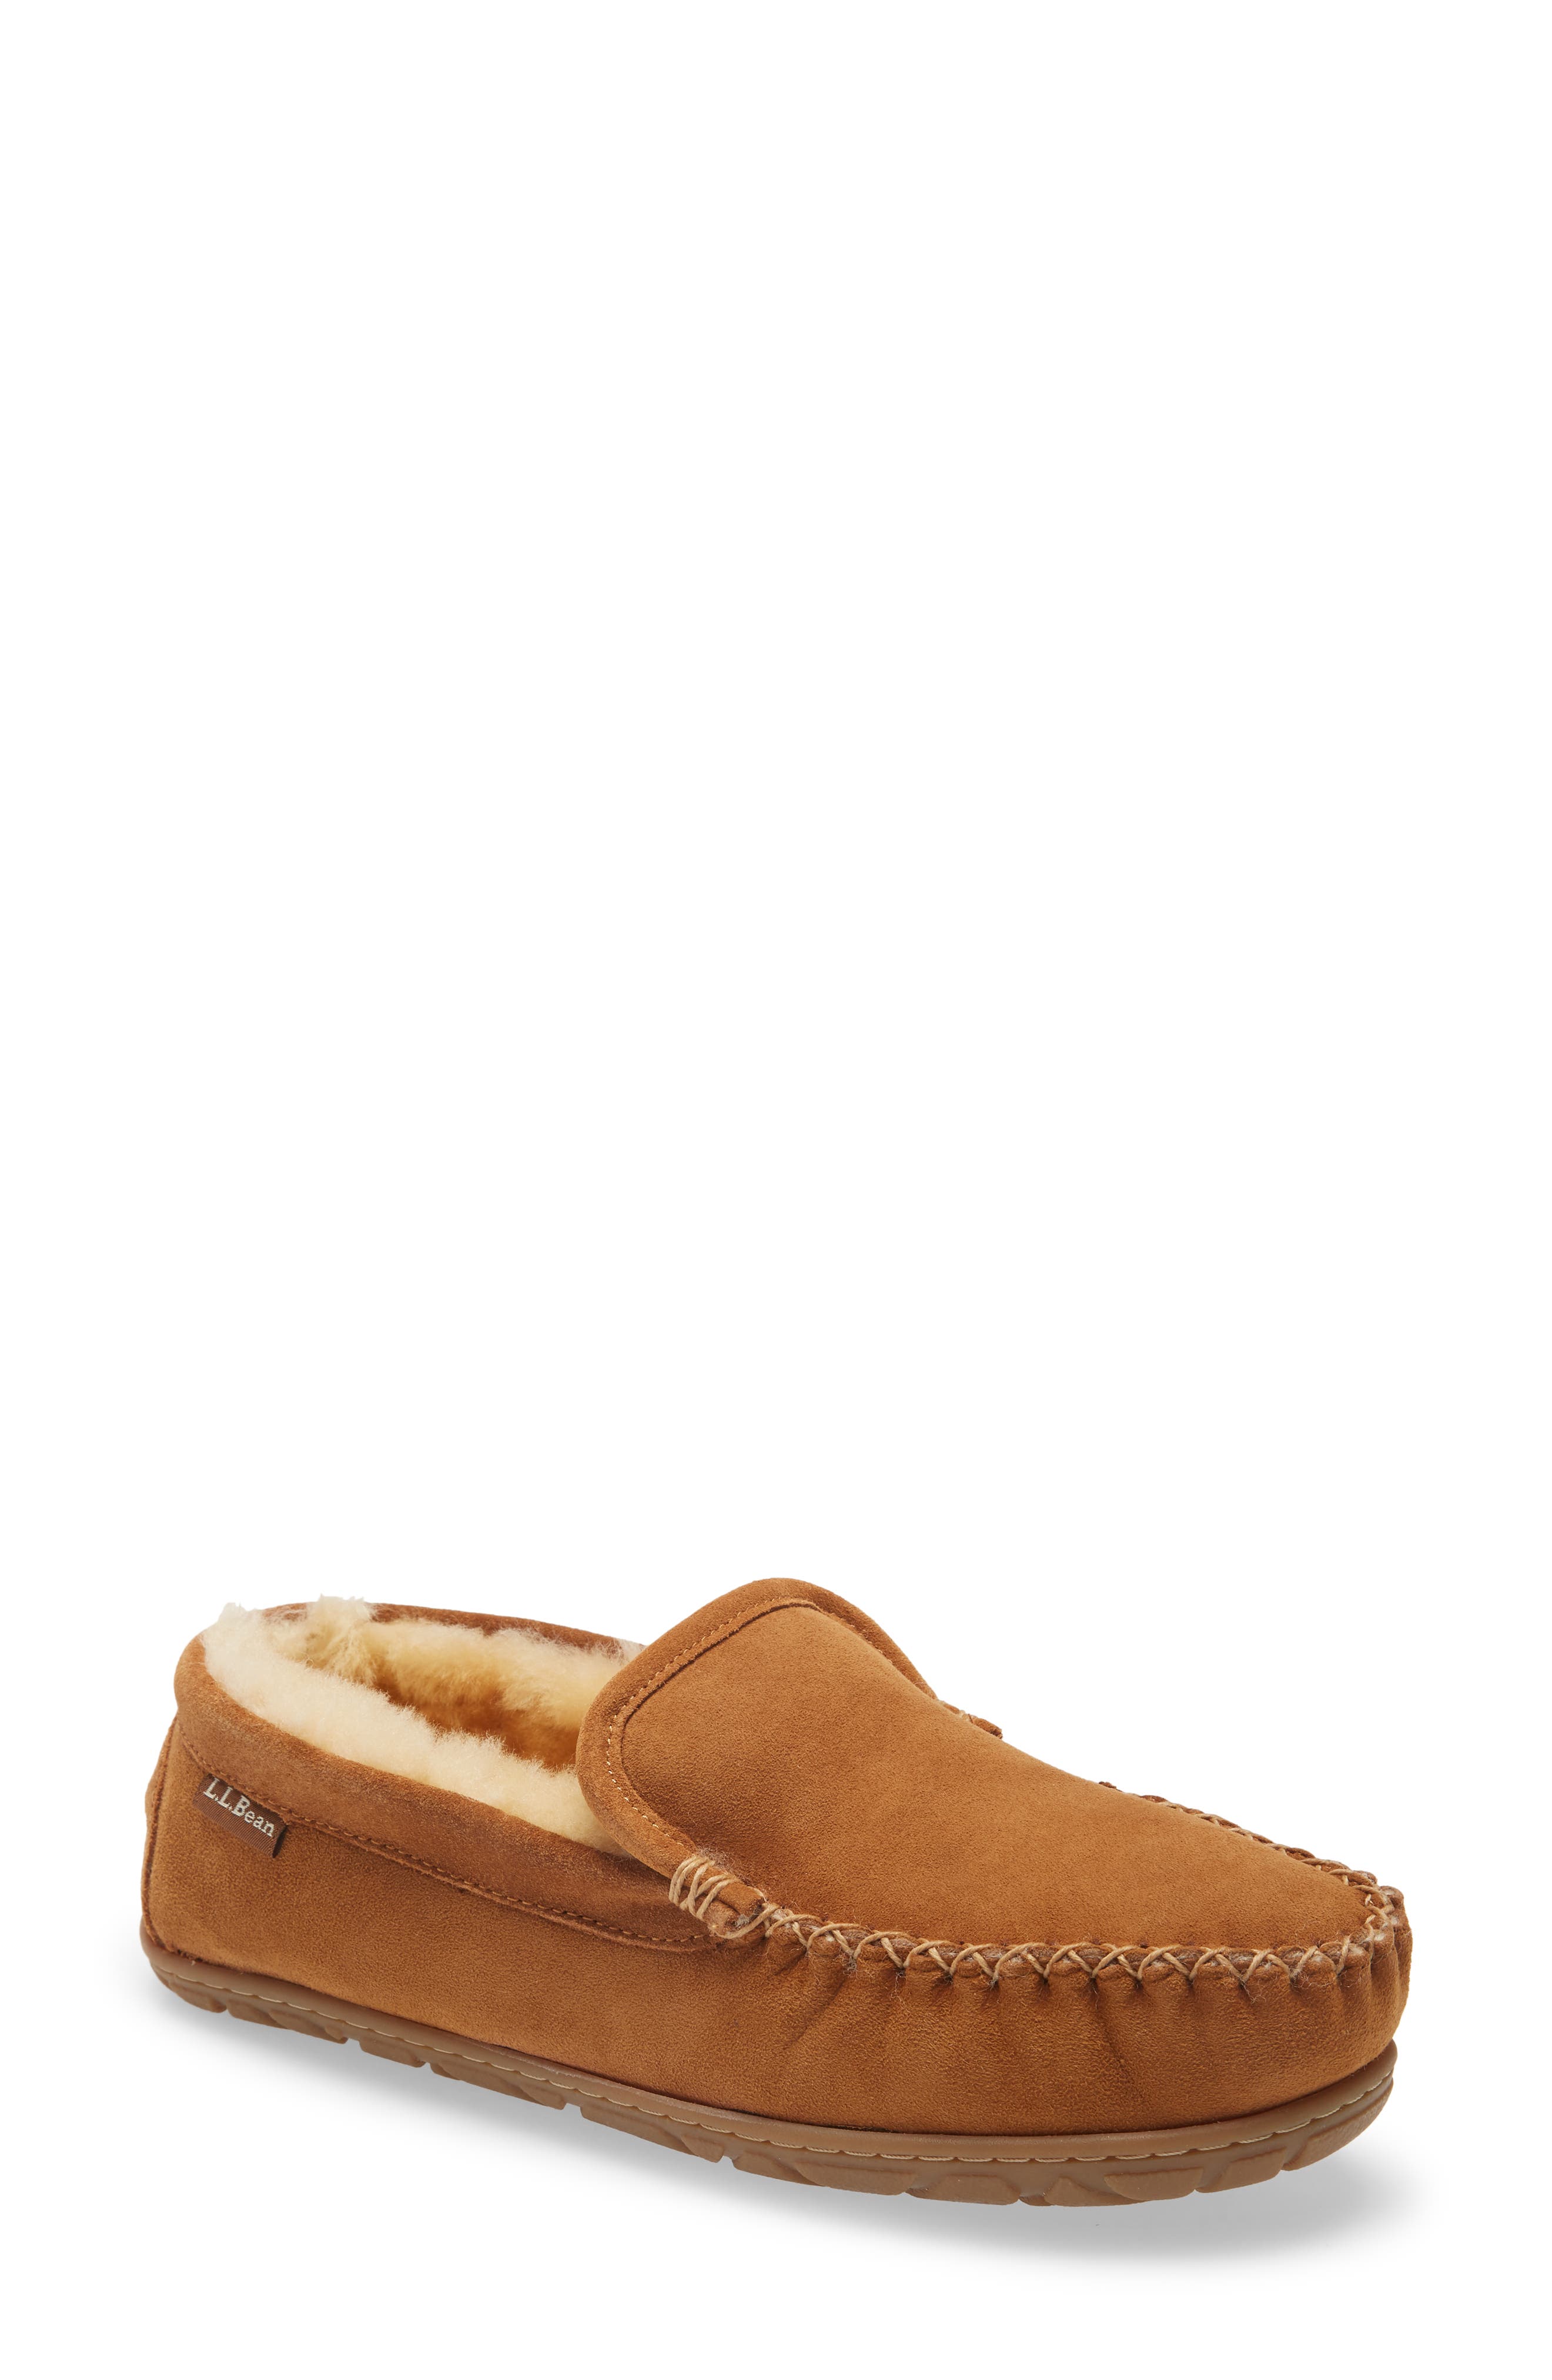 Mytheresa Men Shoes Slippers Hector shearling-lined suede slippers 